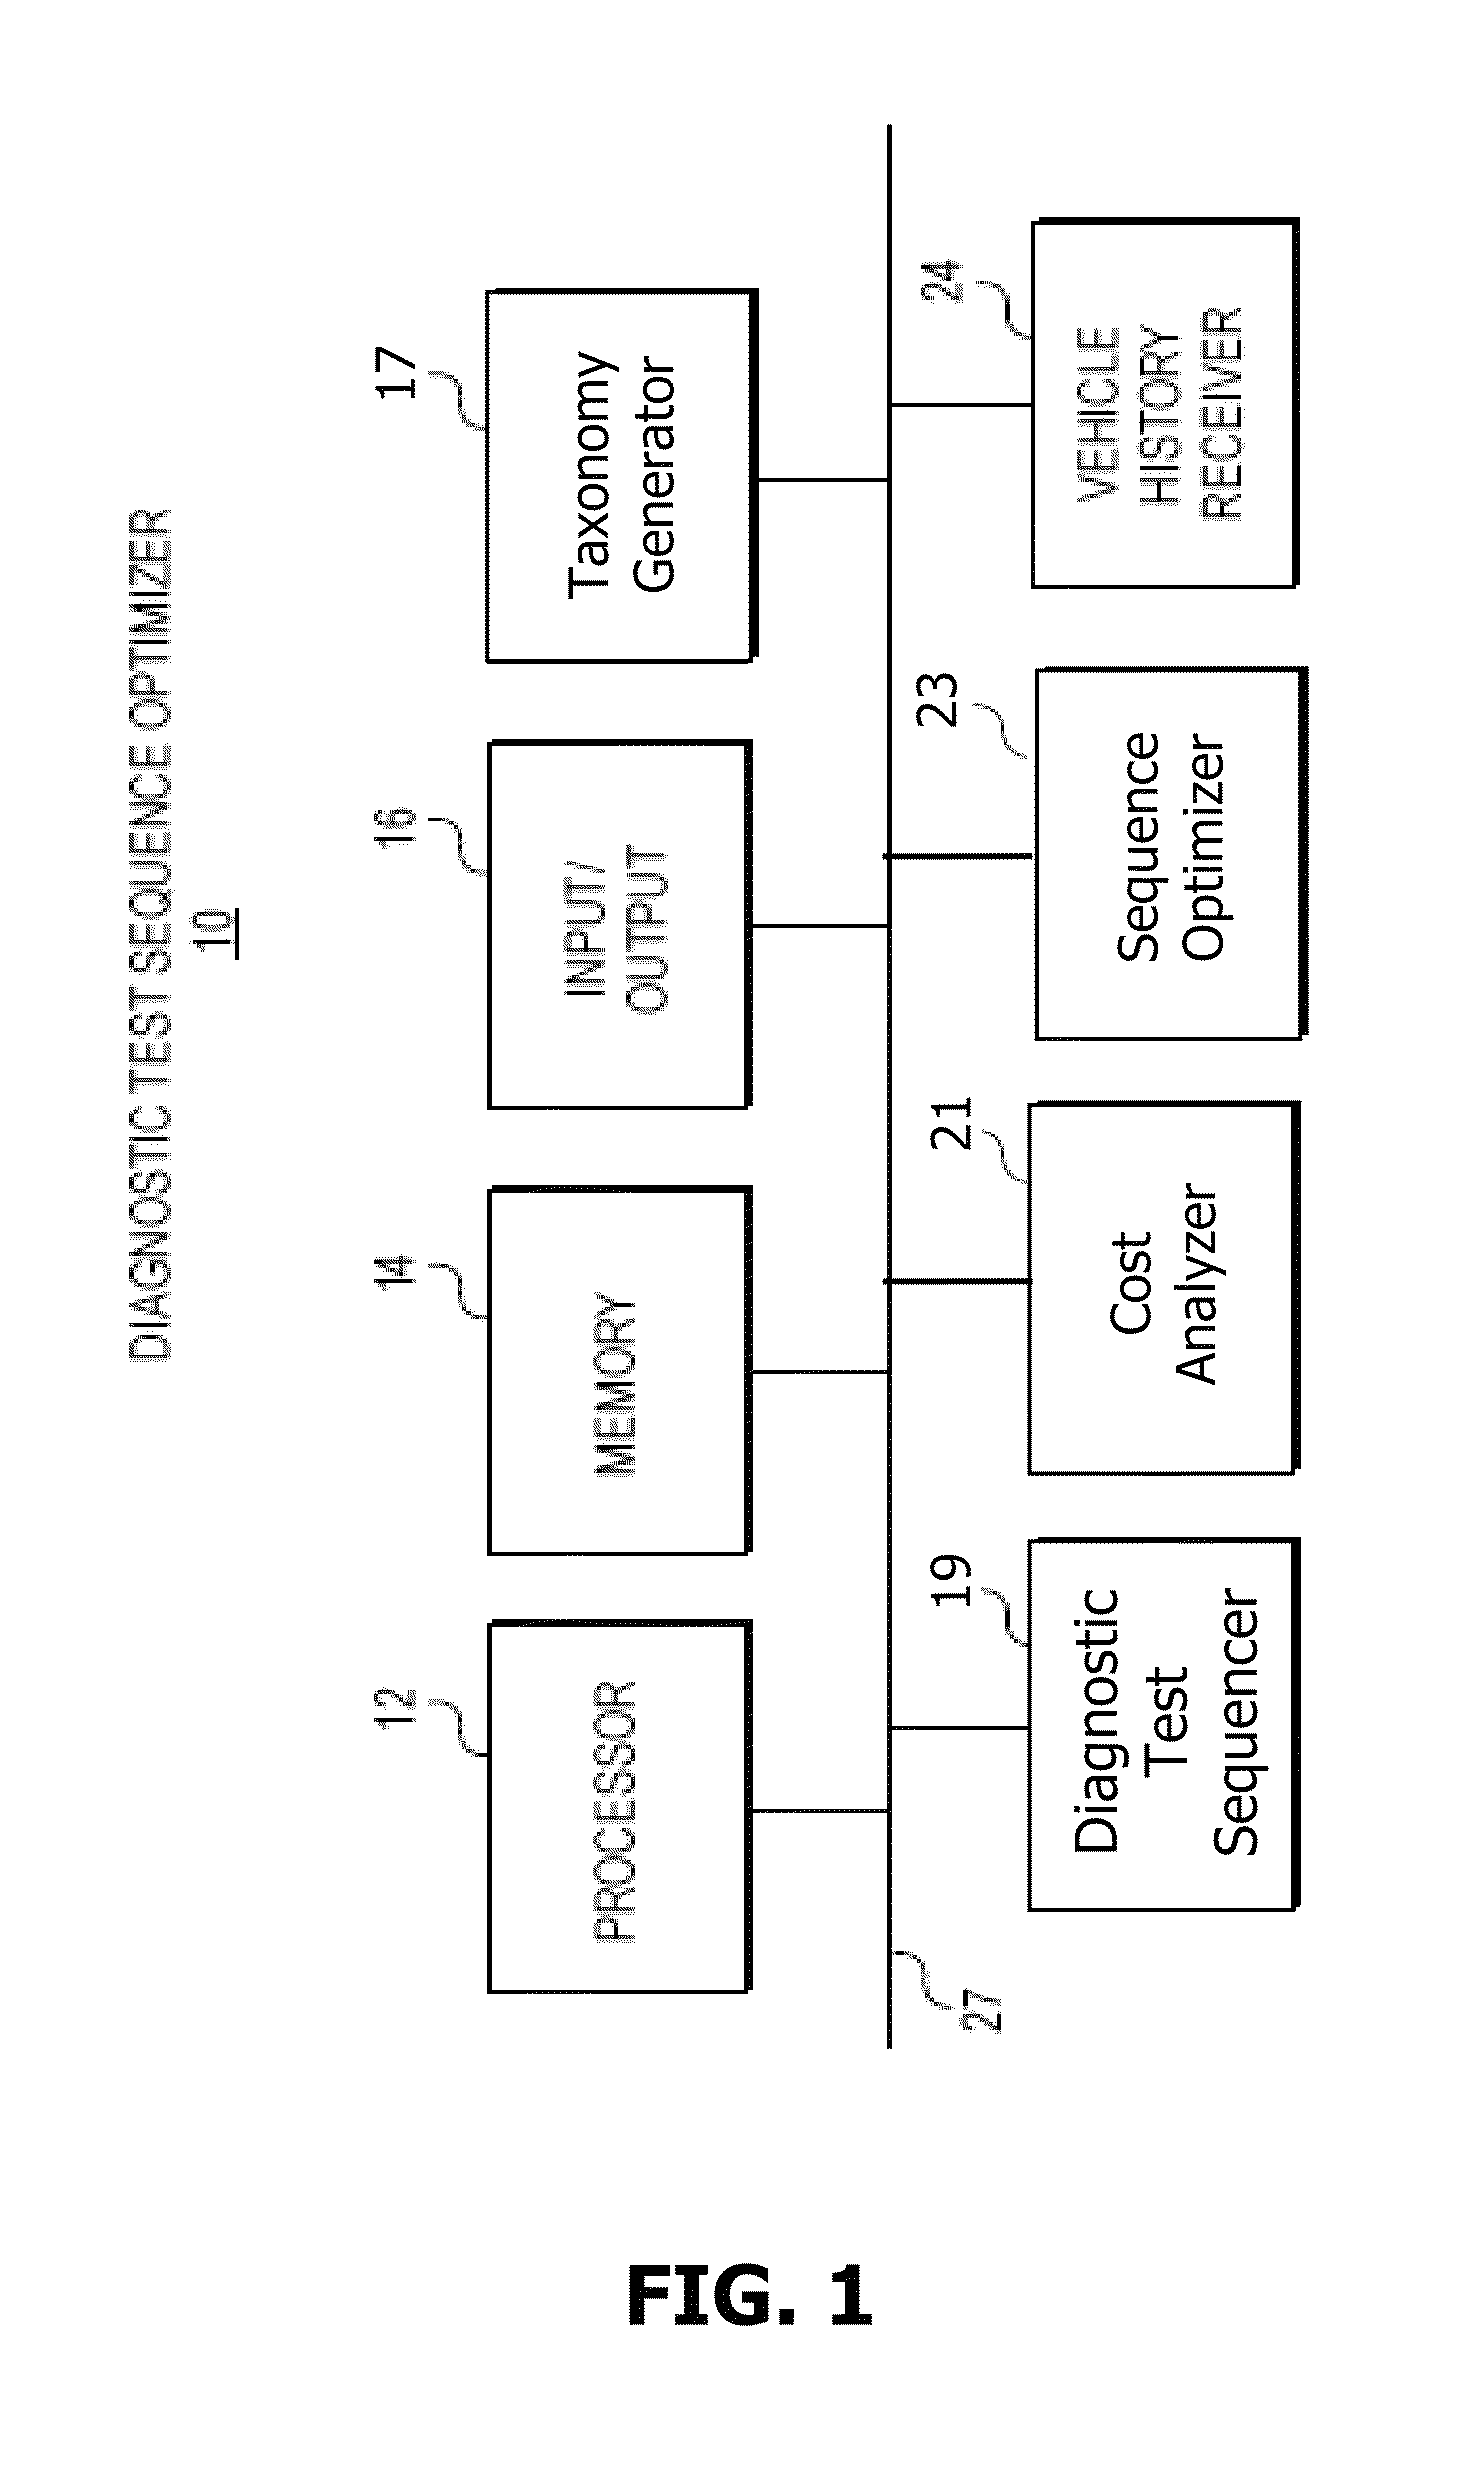 Vehicle test sequence cost optimization method and apparatus